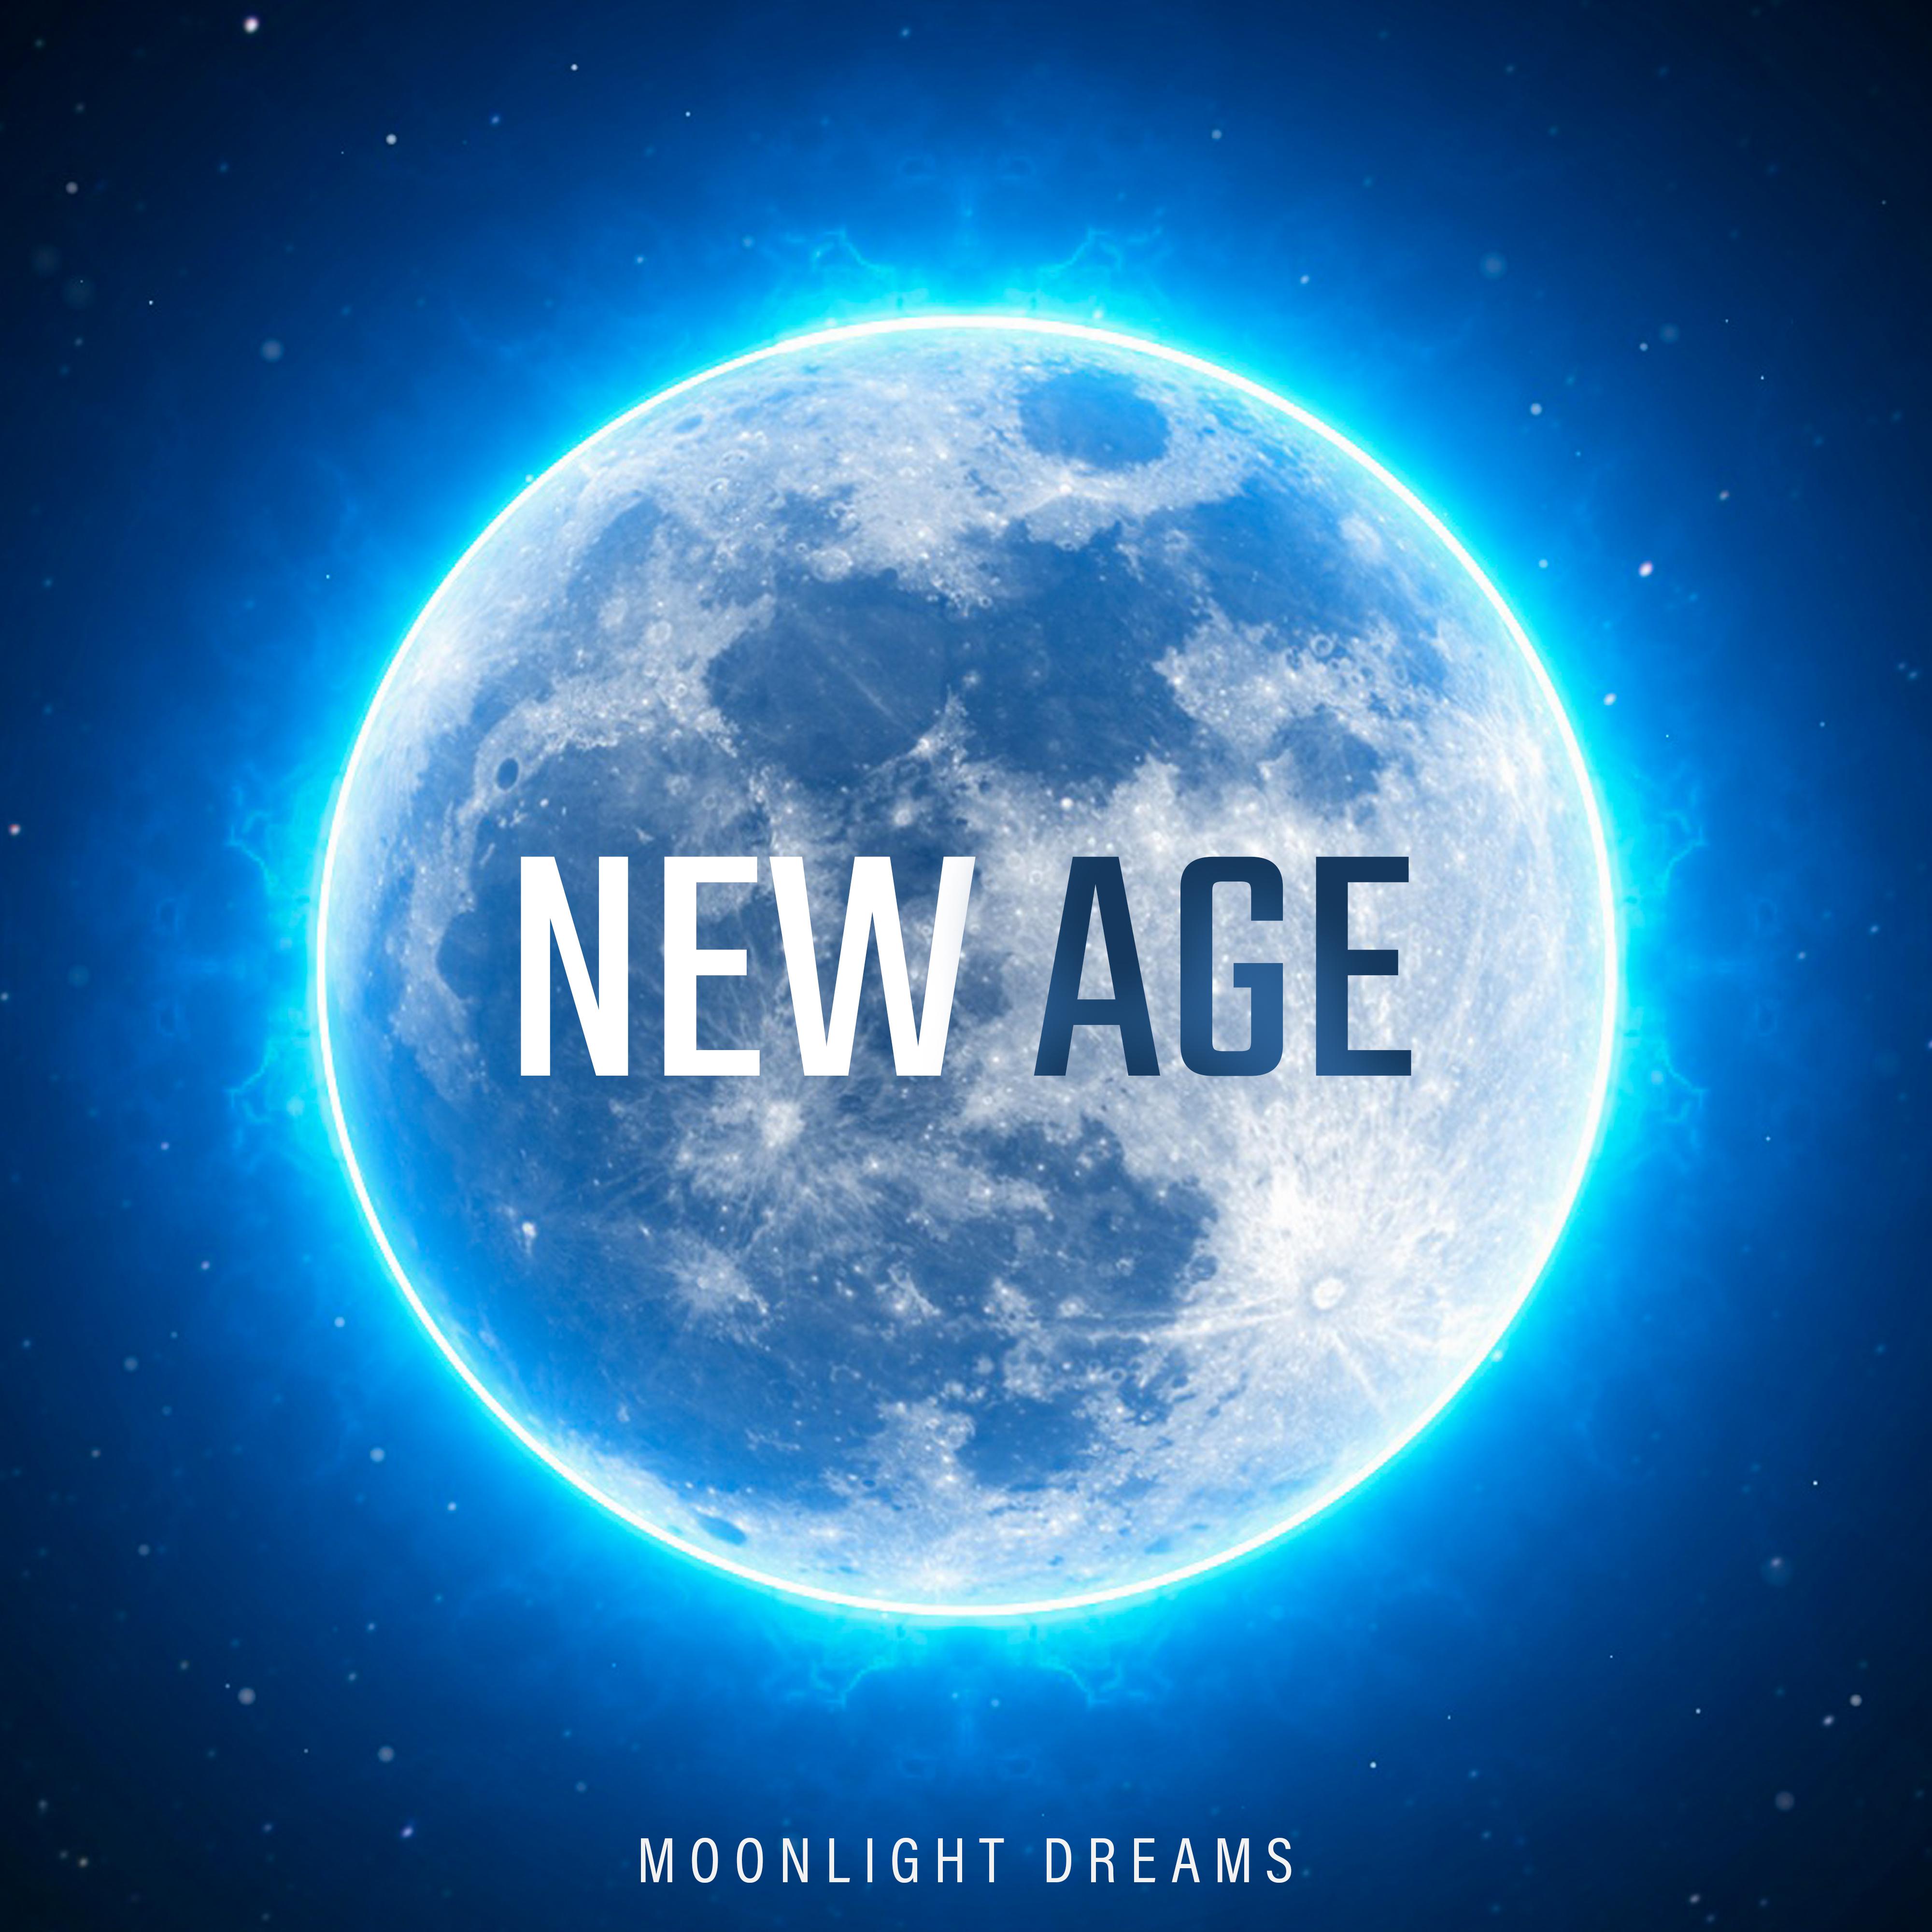 New Age Moonlight Dreams: 2019 Soft Music Compilation for Perfect Sleep, Evening Calming Down After Long Day, Beautiful Dreams